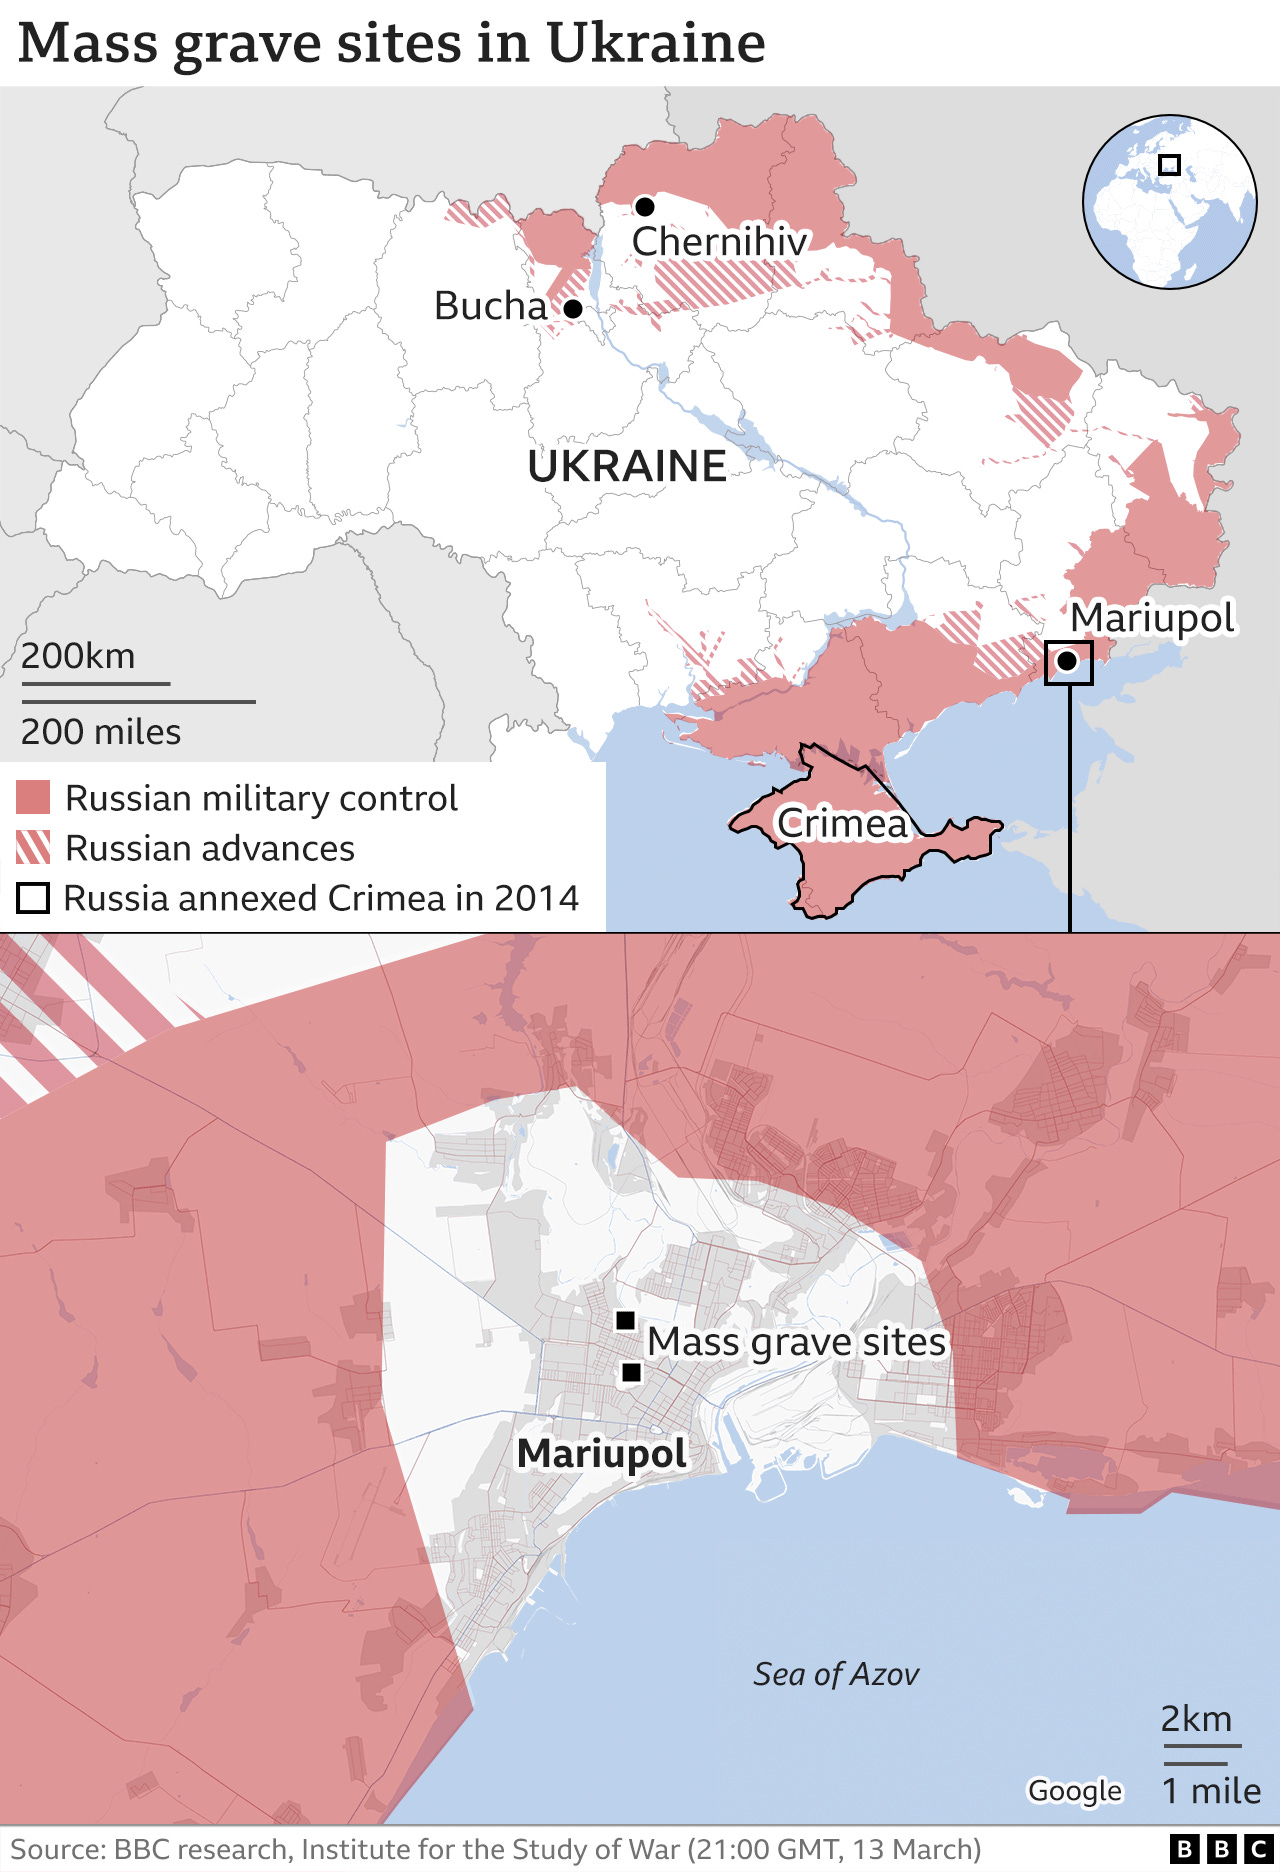 Mass graves in Ukraine: Battered cities are digging makeshift burial sites  - BBC News